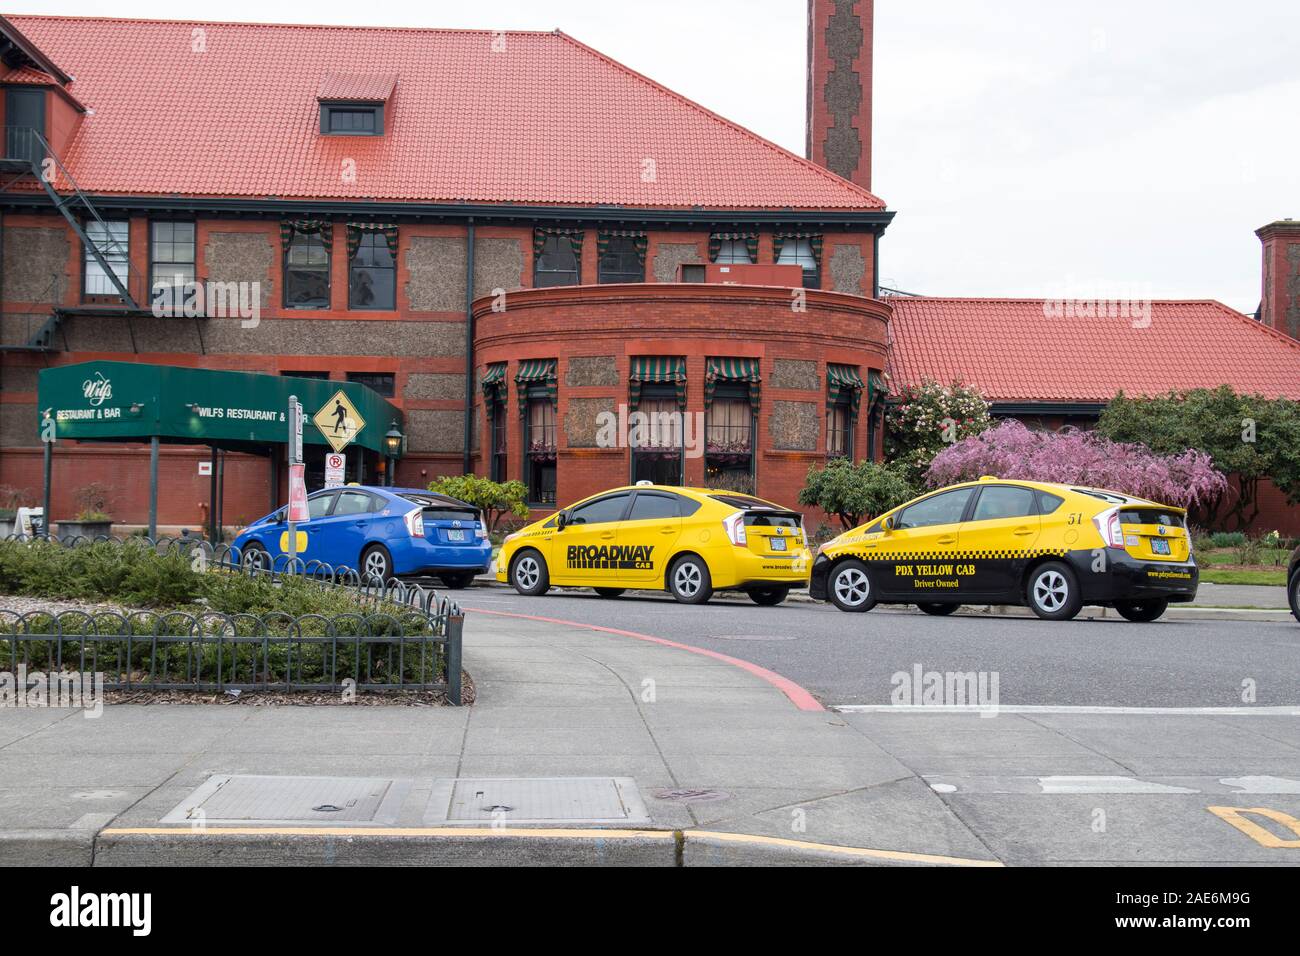 Portland, Oregon. Circa 2019. Broadway Cab and PDX Yellow Cab parked behind one another and waiting to pick up customers at Portland Union Station. Stock Photo